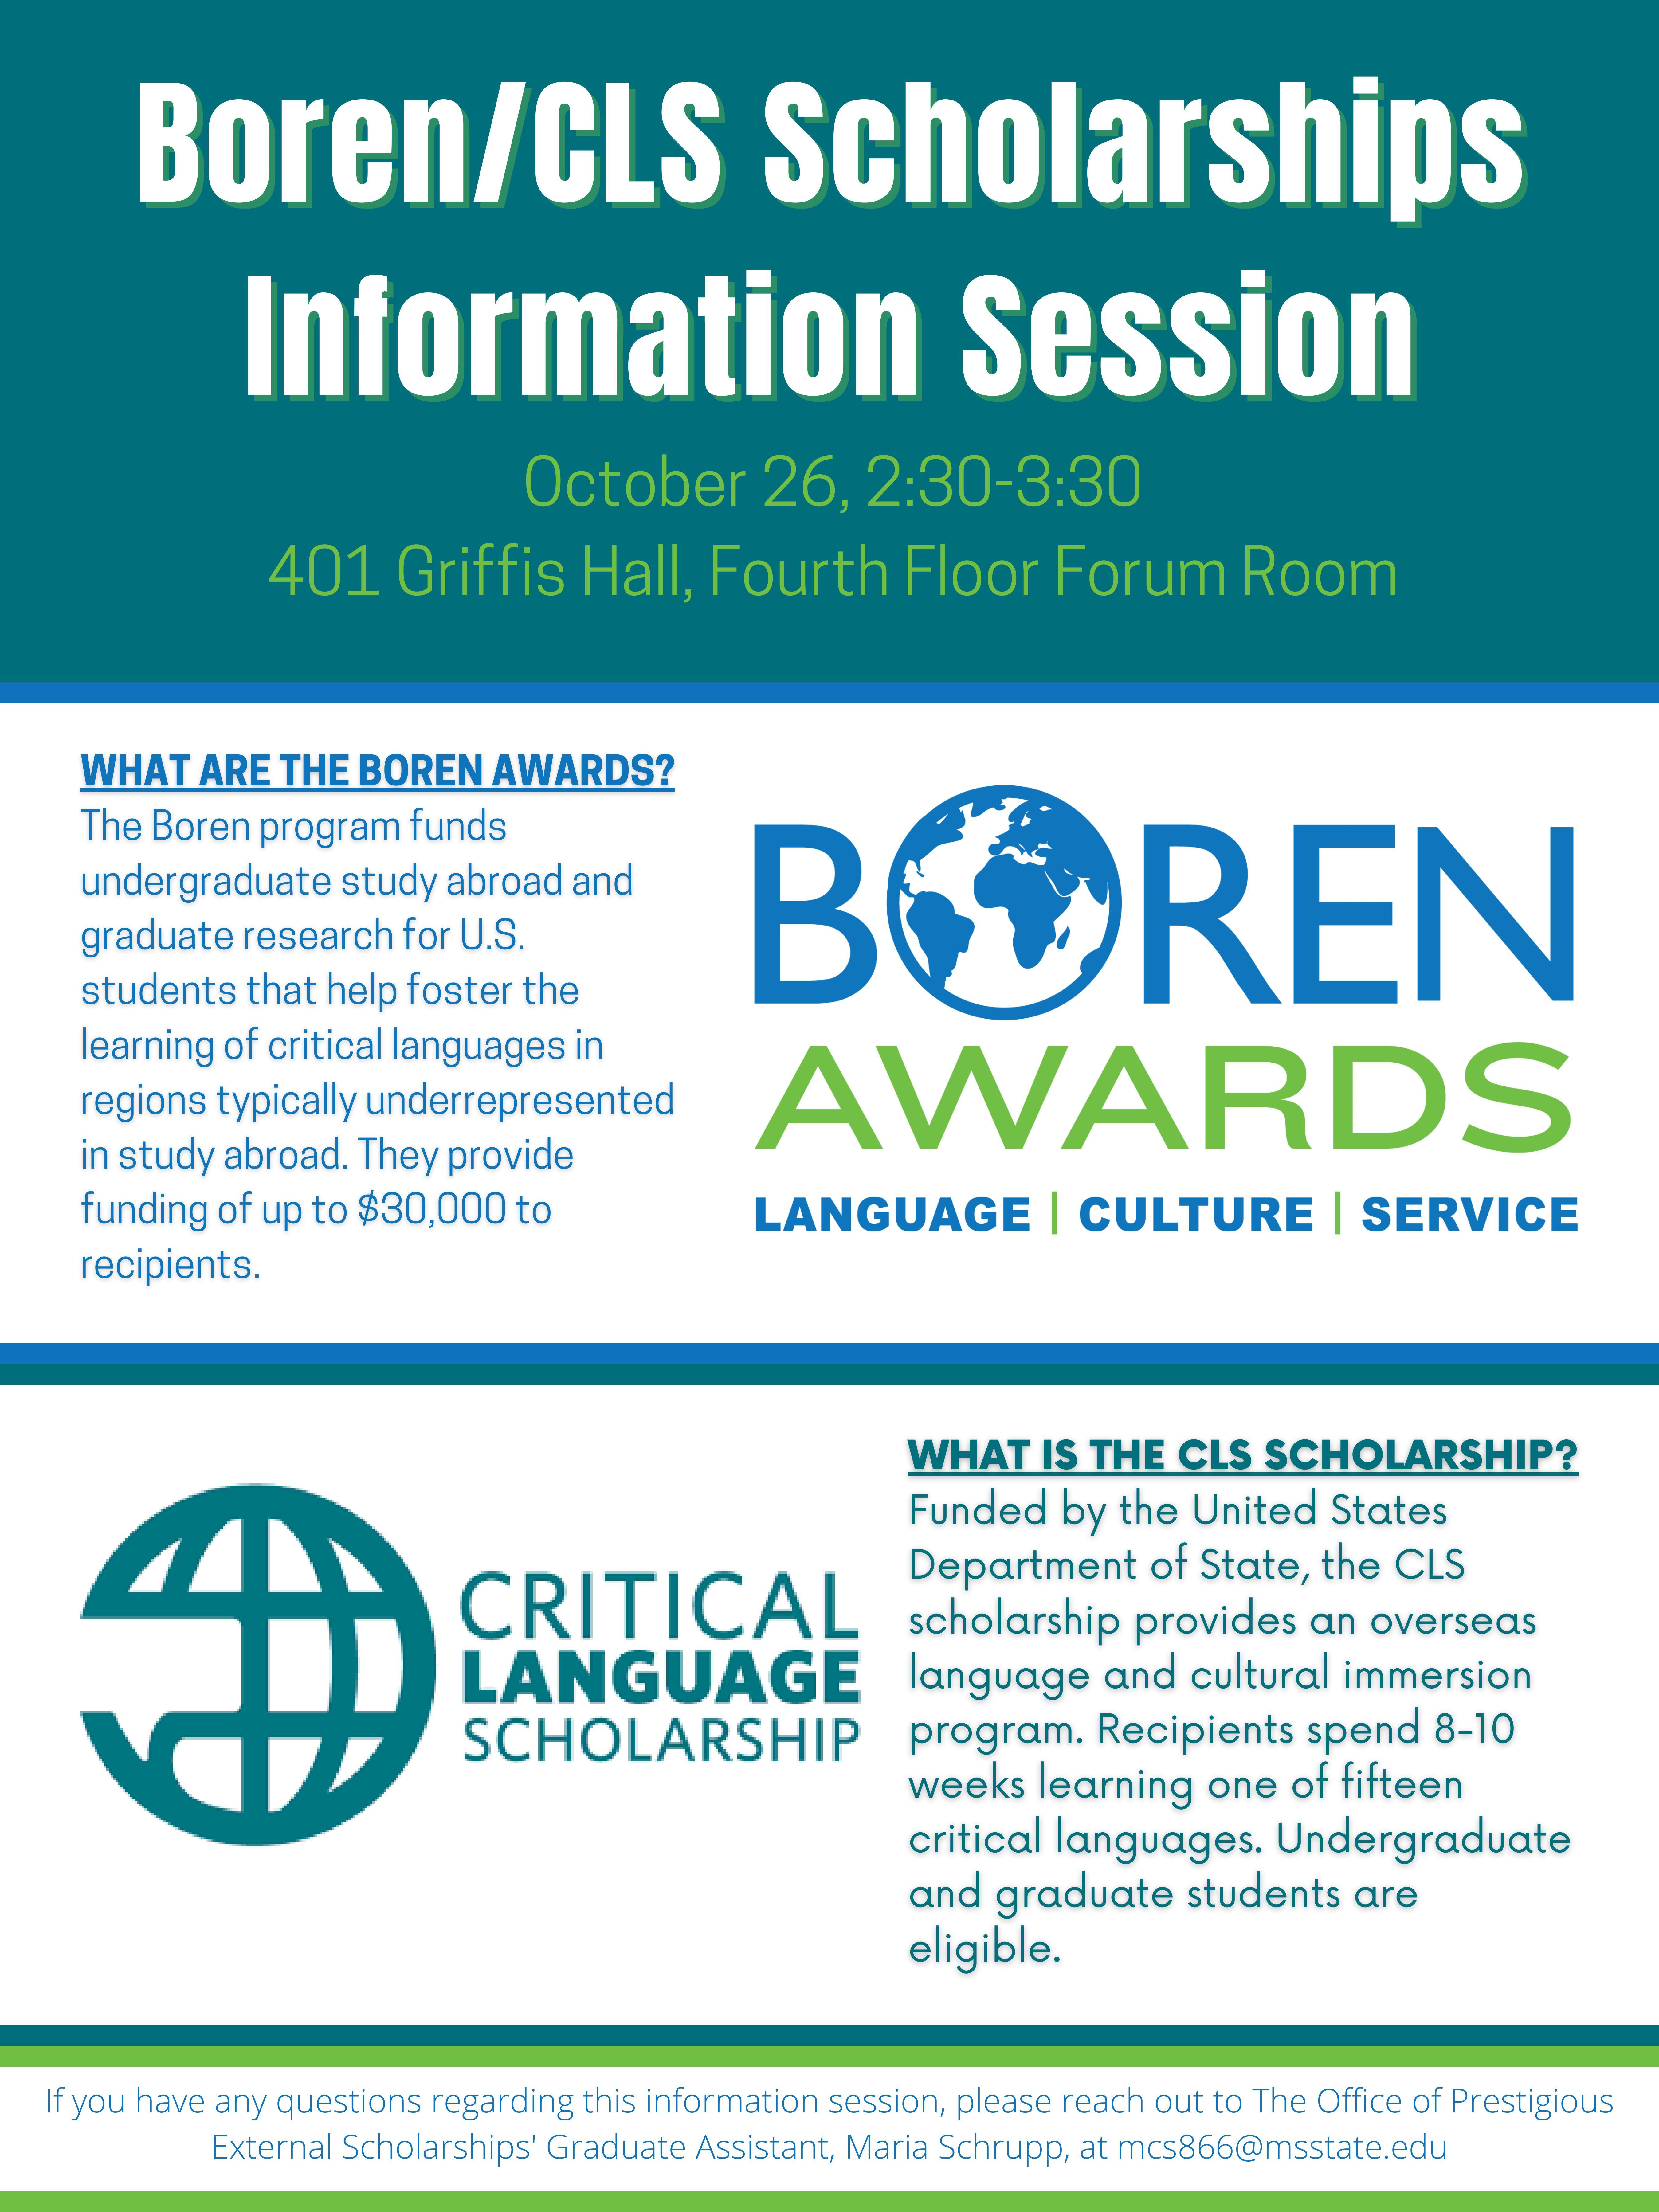 Teal, green and white graphic promoting MSU's information session for Boren Awards and the Critical Language Scholarship